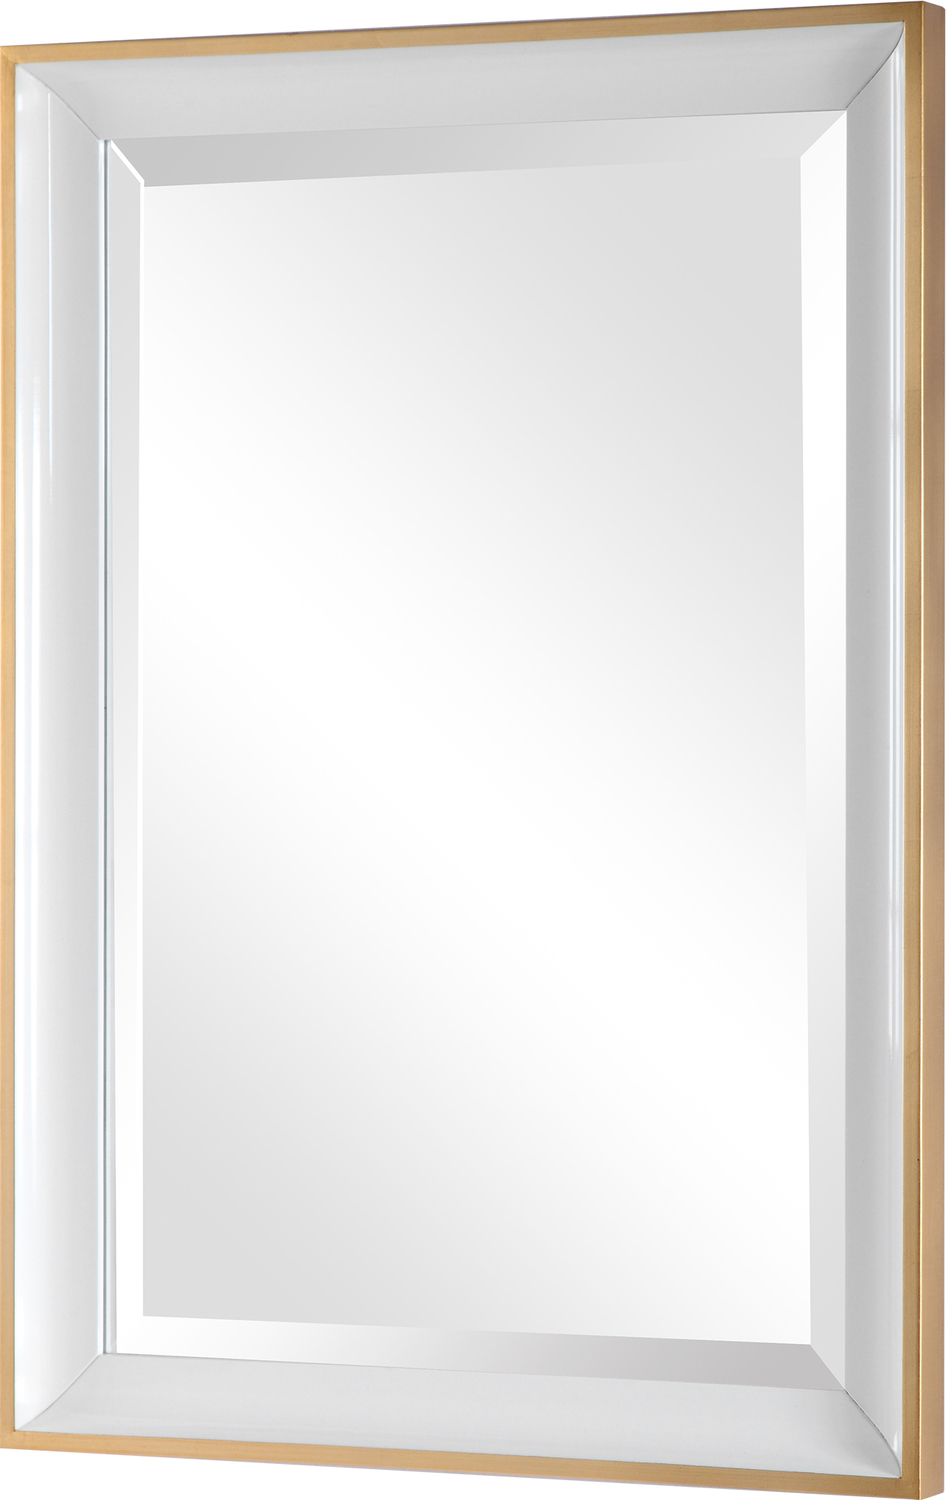 modern mirror round Uttermost White Mirror This Elegantly Refined Design Has A Large Gloss White Inner Frame Accented By A Petite Gold Leaf Outer Frame. The Mirror Has A 1" Bevel And May Be Hung Horizontal Or Vertical.